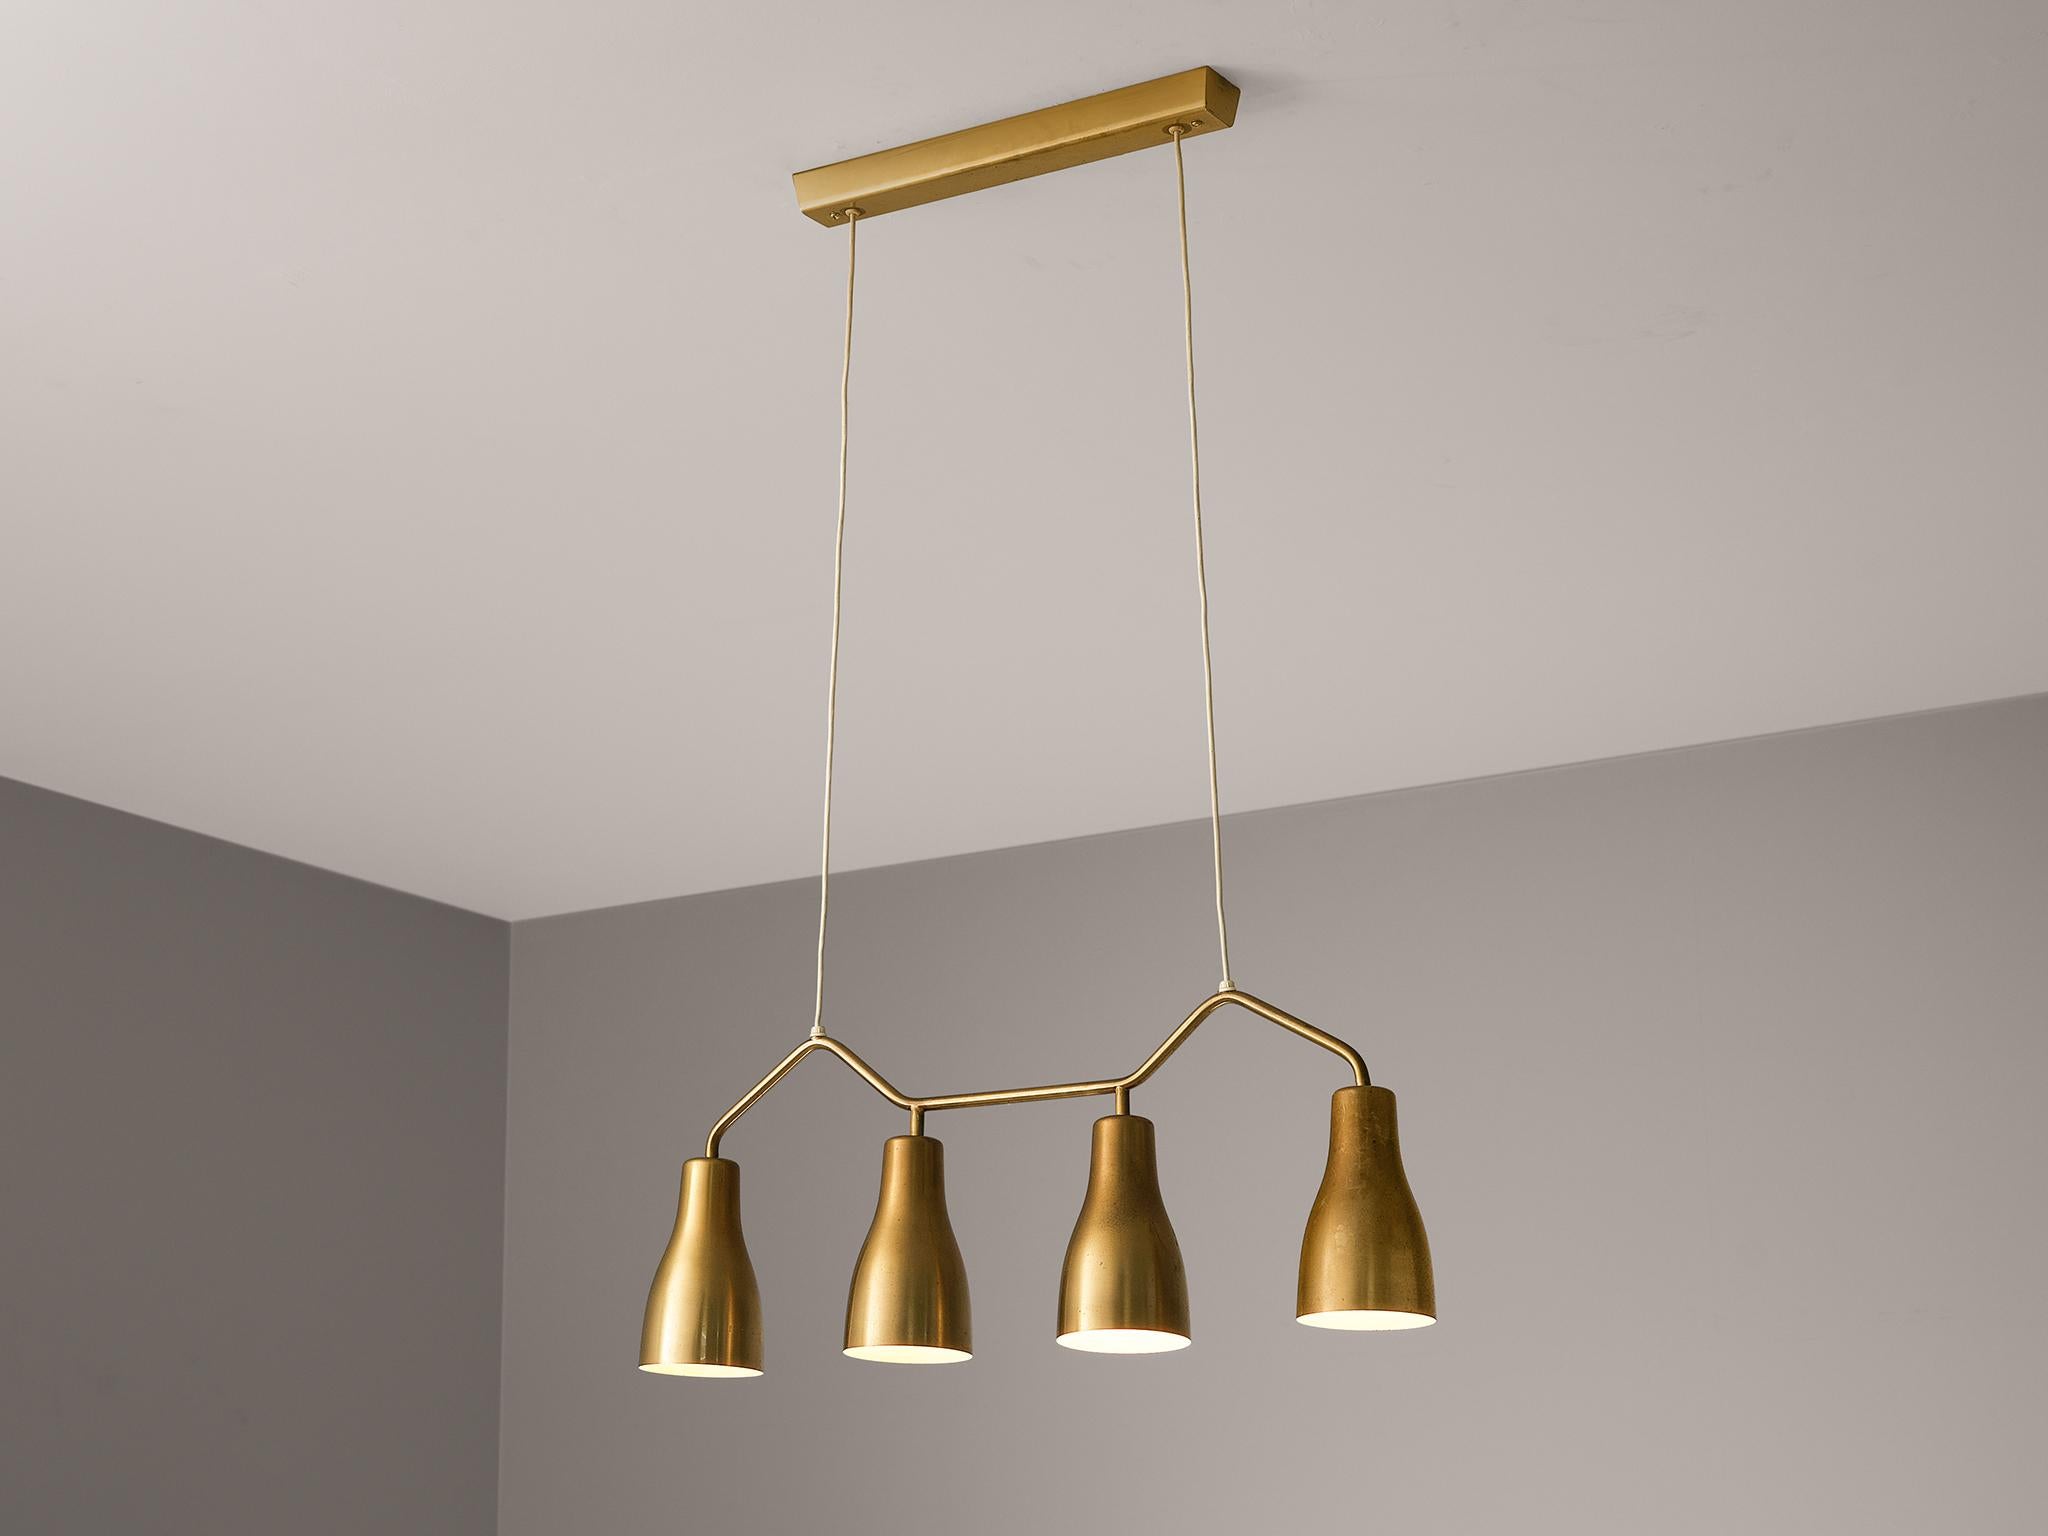 Hans Bergström for Ateljé Lyktan, chandelier, brass, Sweden, 1950s

This unique chandelier features a charming composition based on four cone-shaped shades fixated to a geometrical frame based on curved lines. The body gets beautifully suspended and